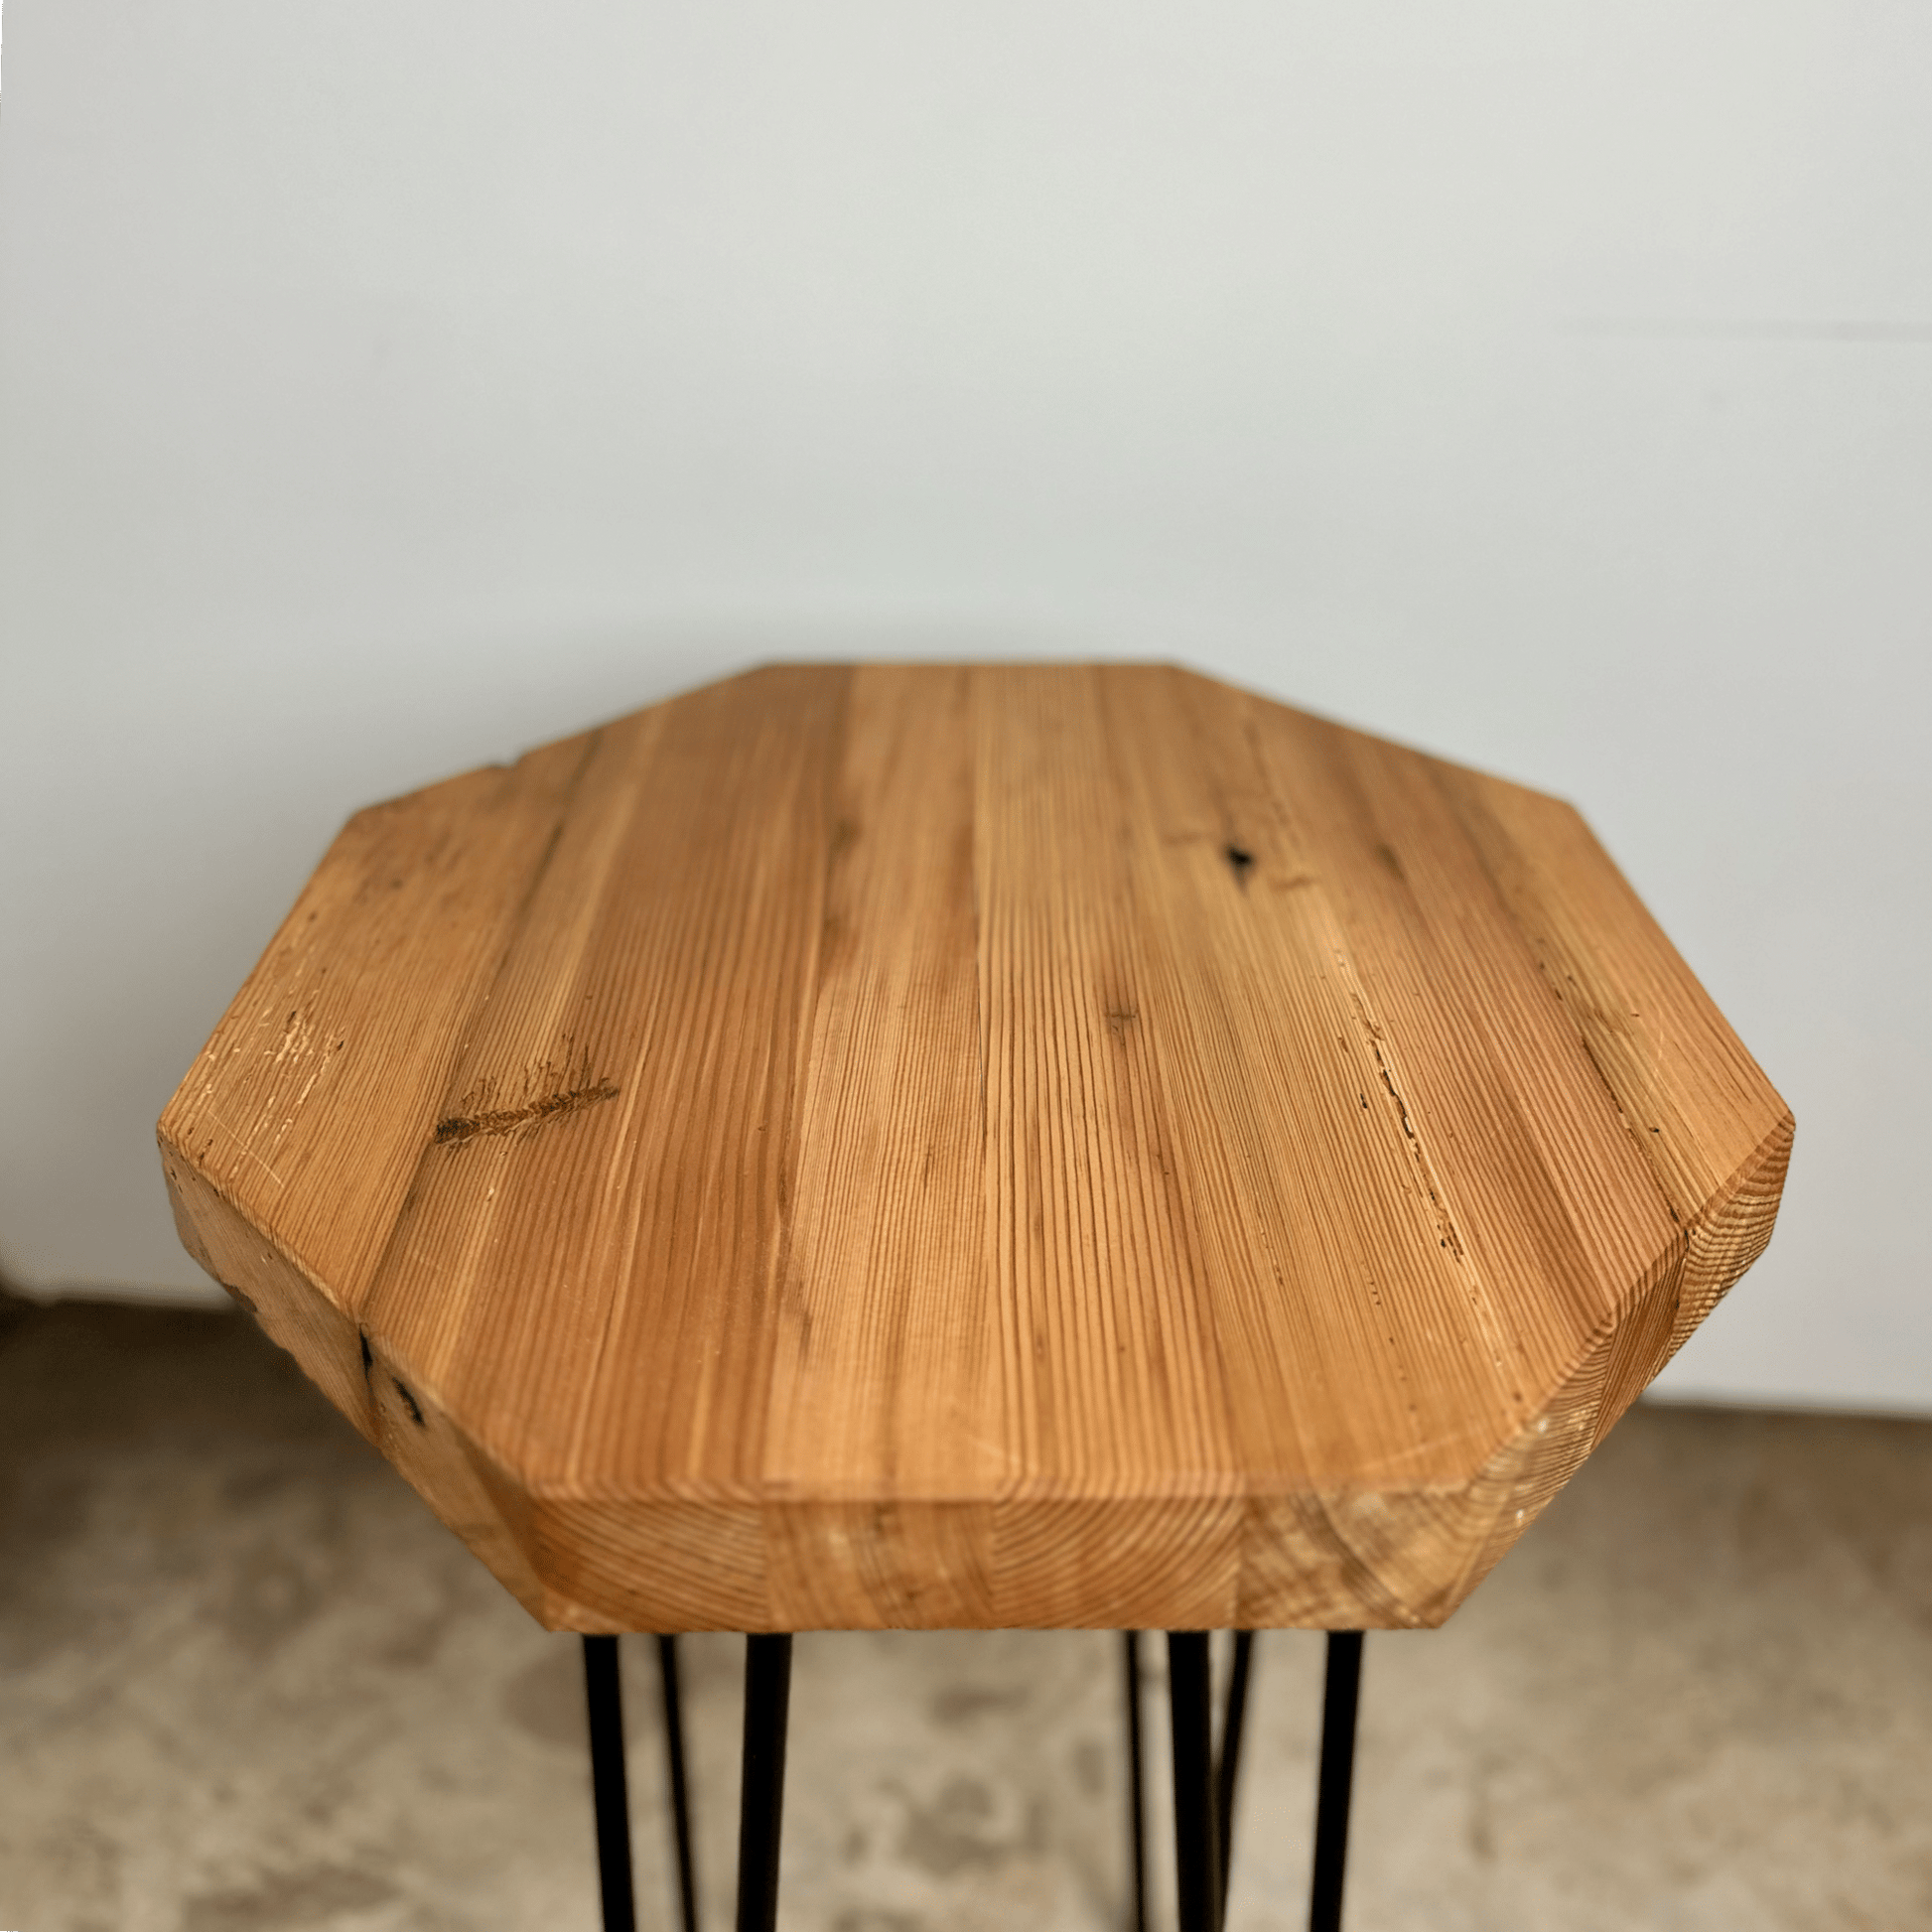 a reclaimed wood table in an octagonal shape and oil finish. The table is supported by four hairpin legs. Grain patterns and color variations in the wood are shown.